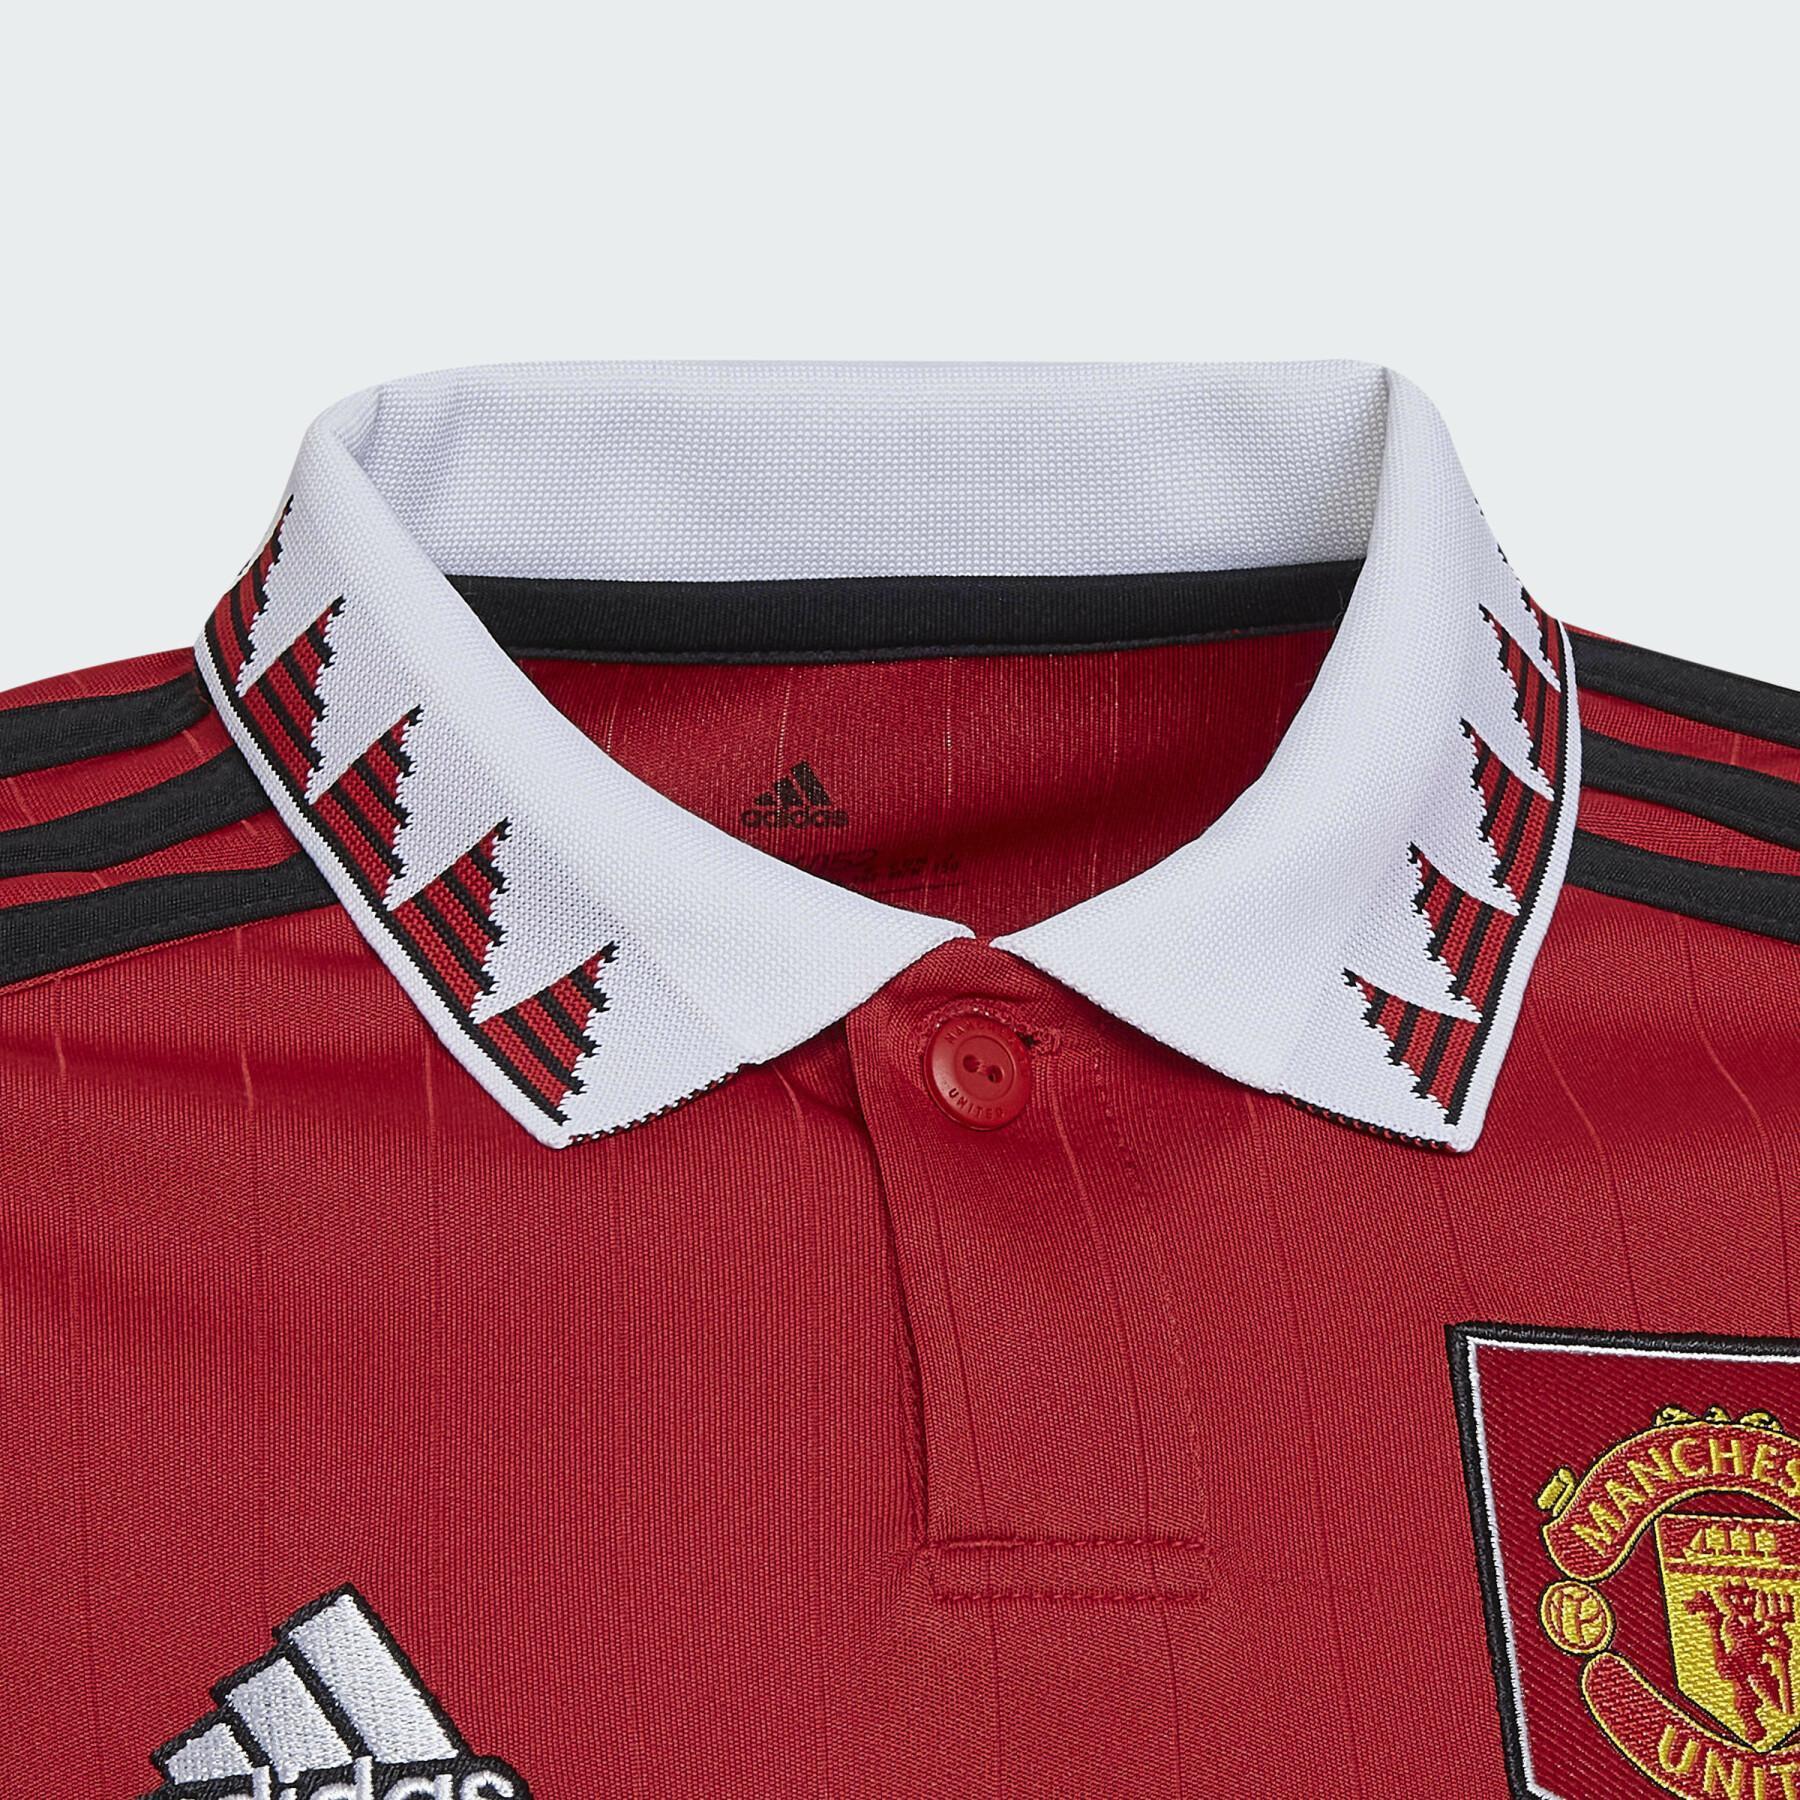 Home jersey child Manchester United 2022/23